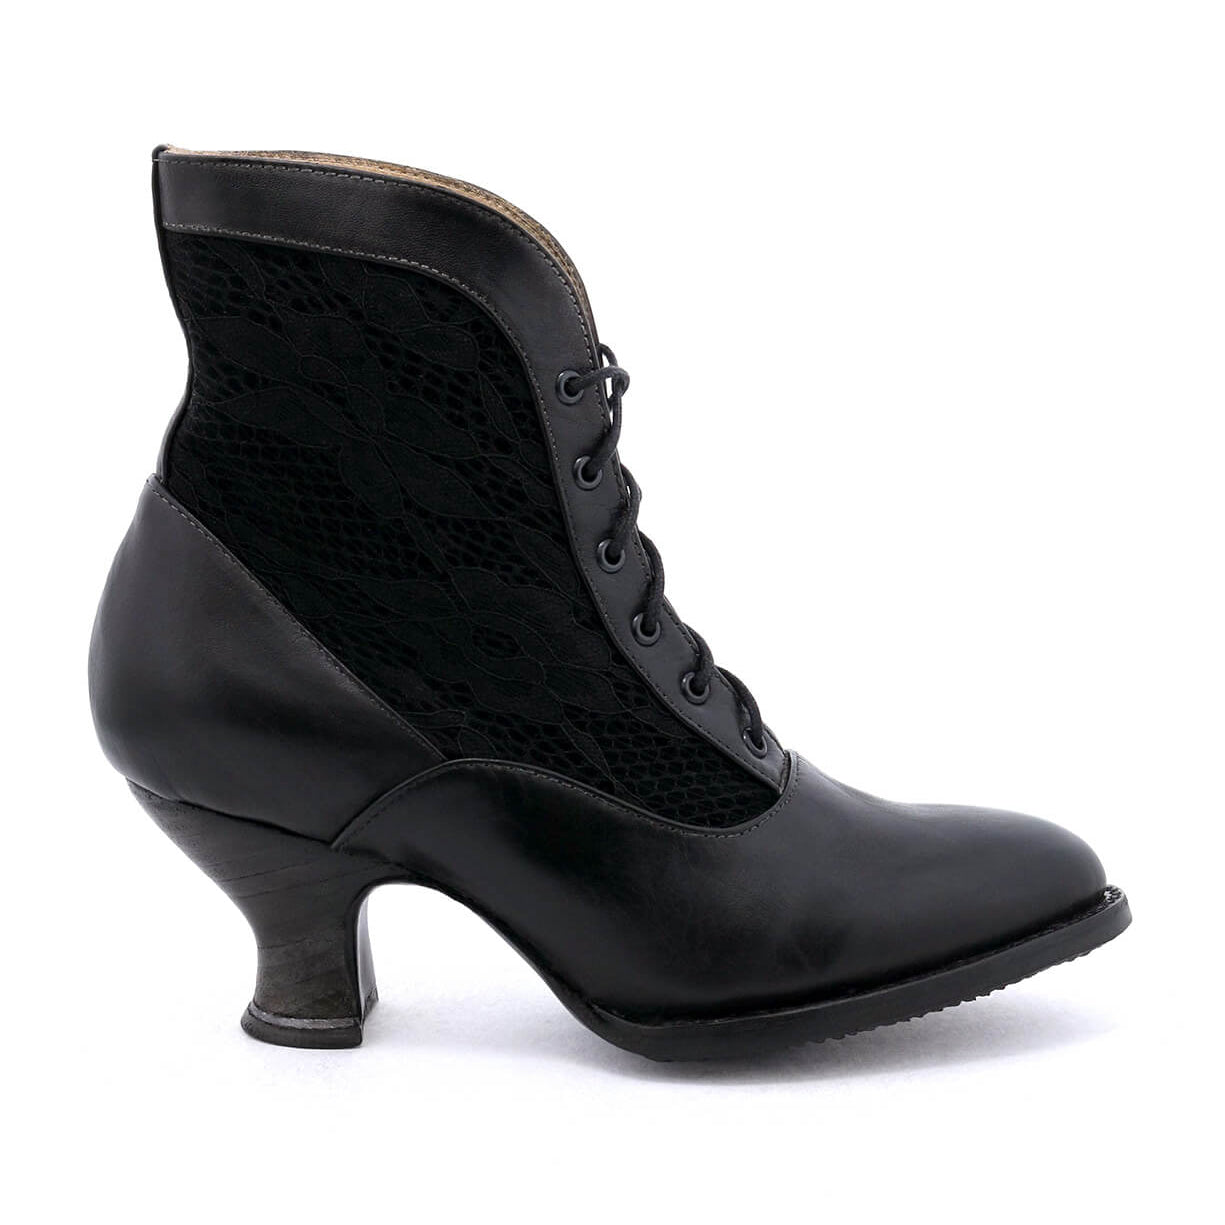 The Oak Tree Farms Jacquelyn ankle boot combines black rustic lace with a touch of romance for a stunning women's footwear option.